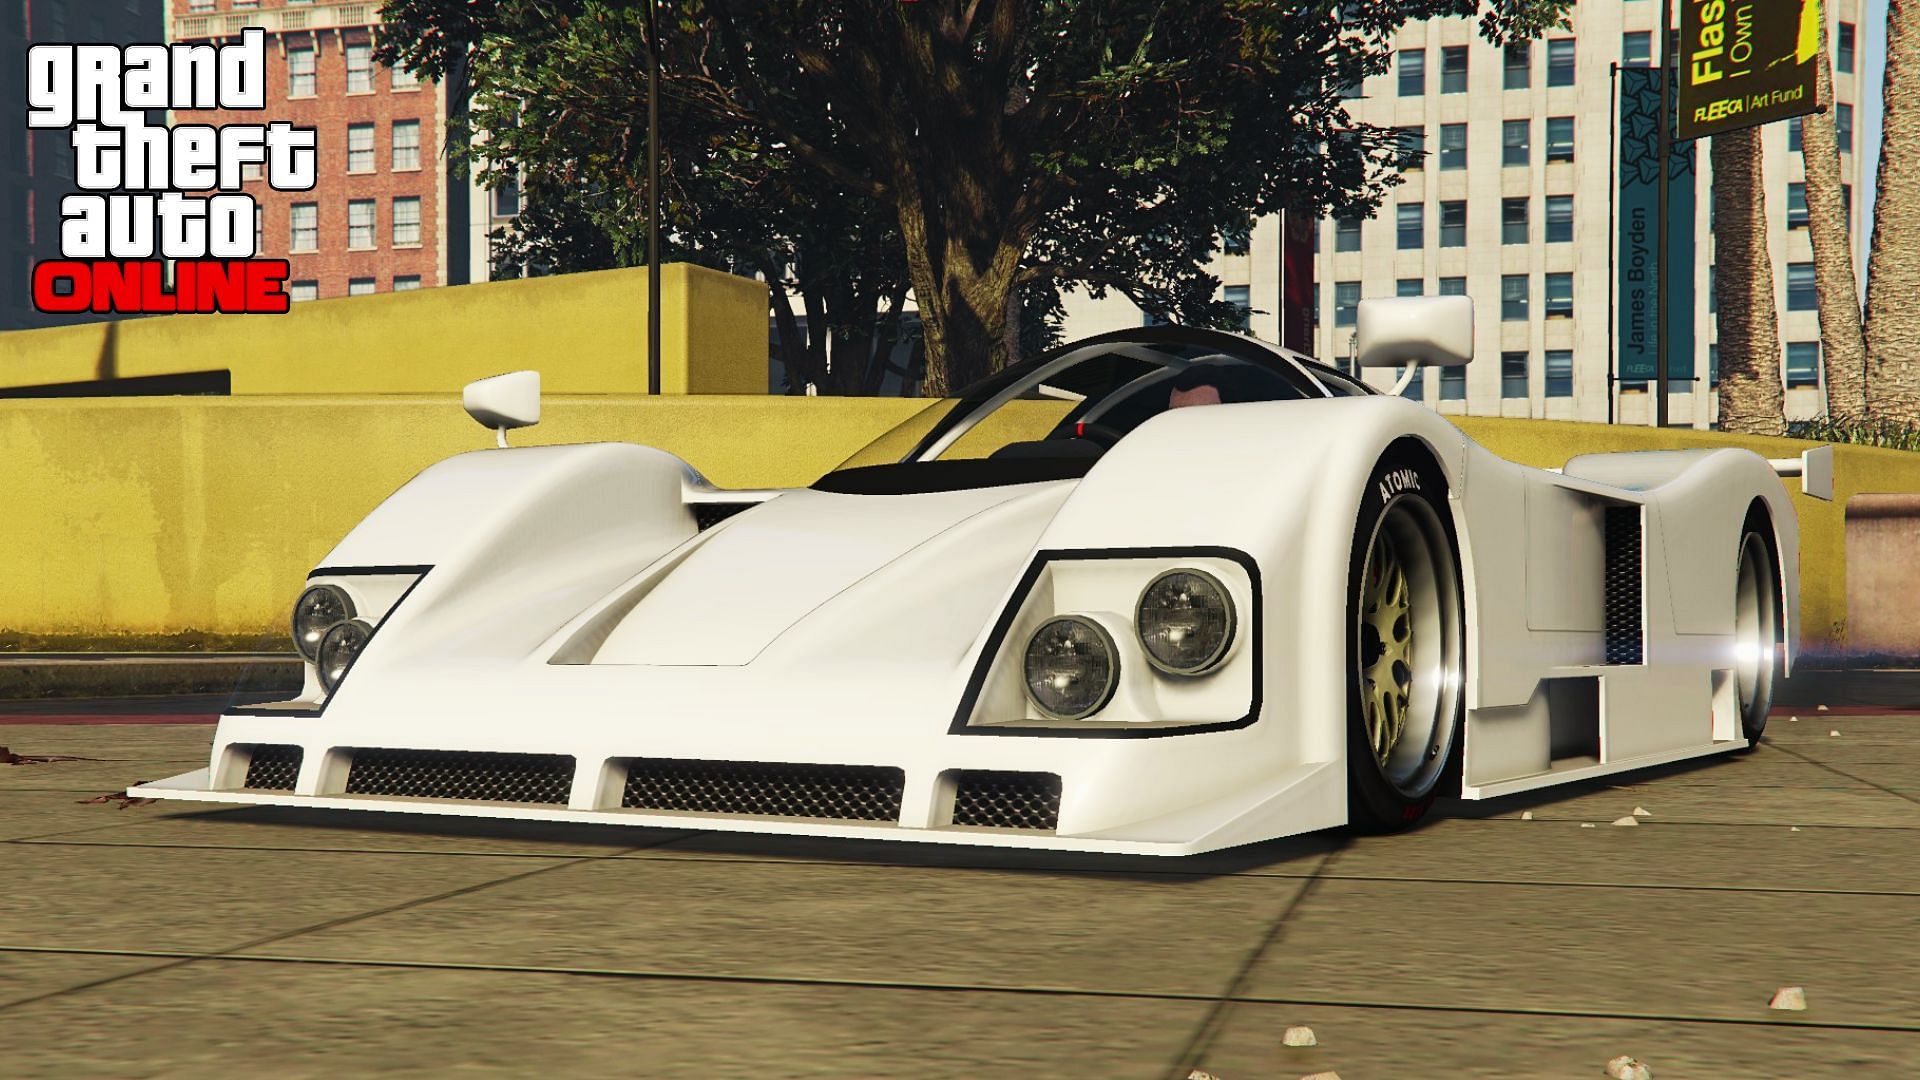 The Annis S80RR in its full glory in GTA Online (Image via GTA Forums/Willy A. Jeep)